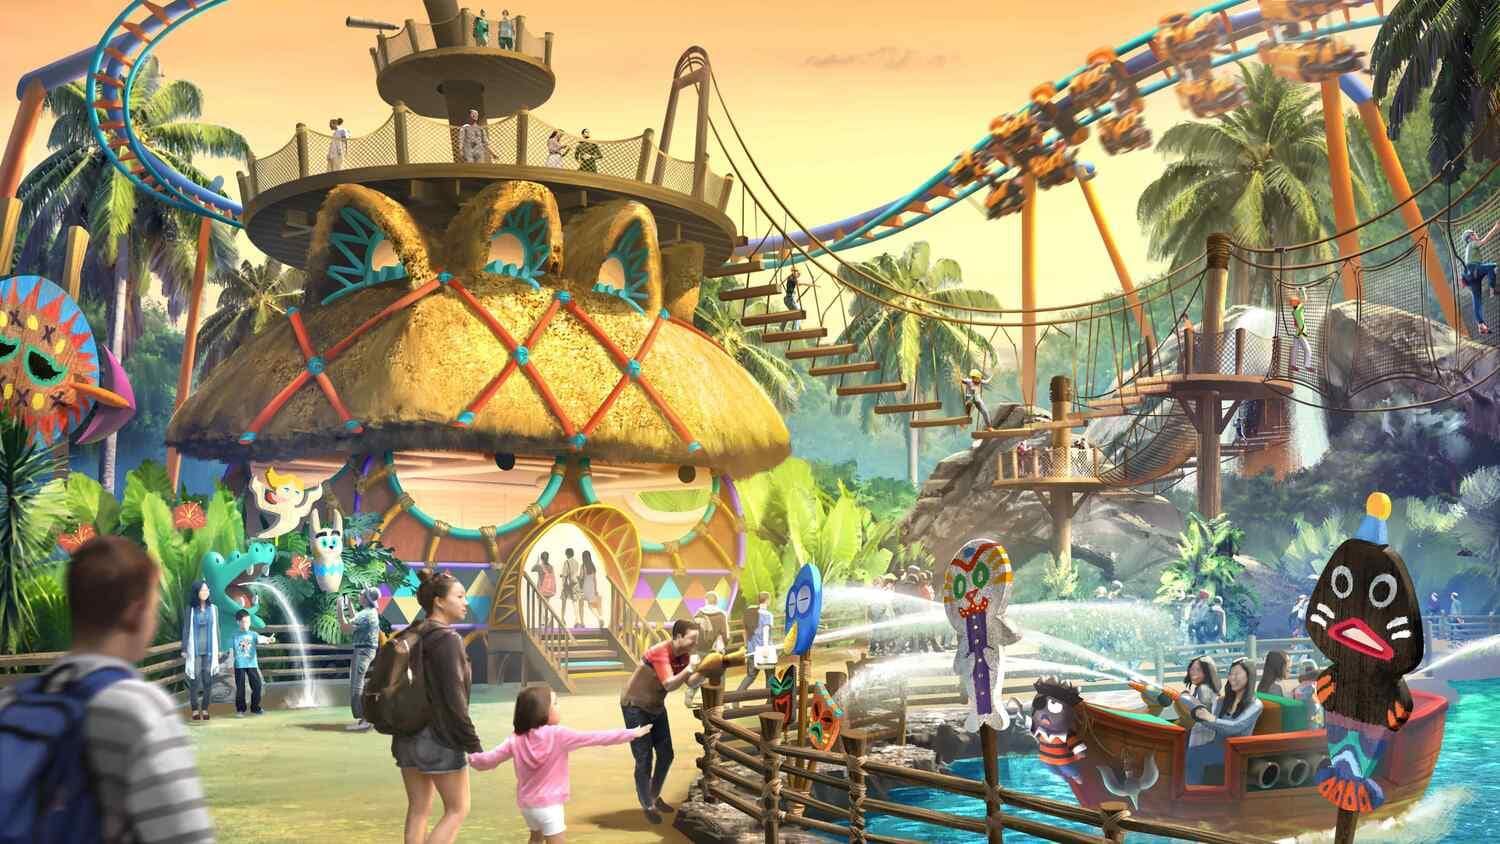 New & upcoming theme parks in Asia - Hello Kitty 2